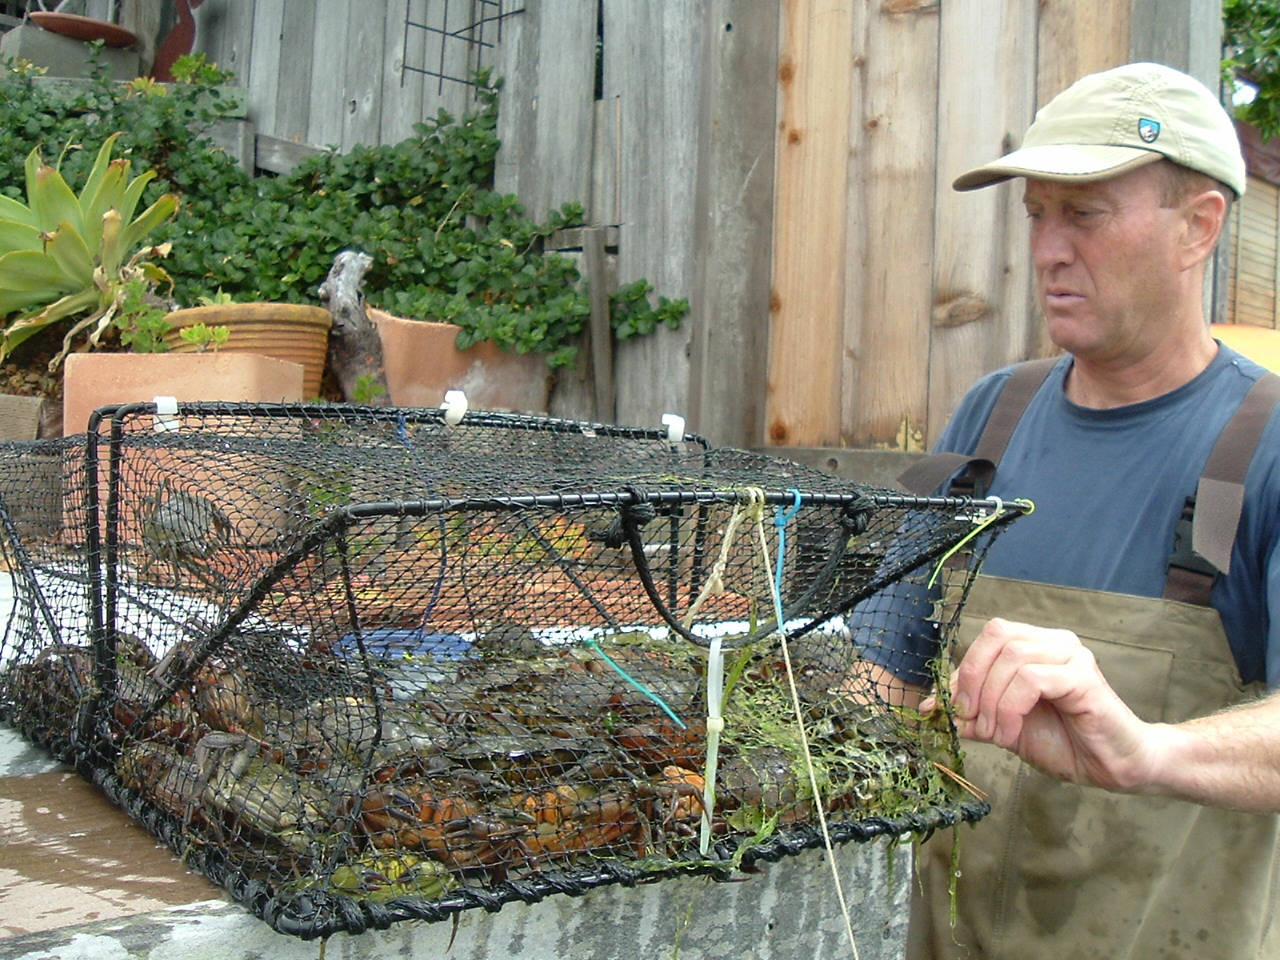 man holds cage full of invasive green crabs